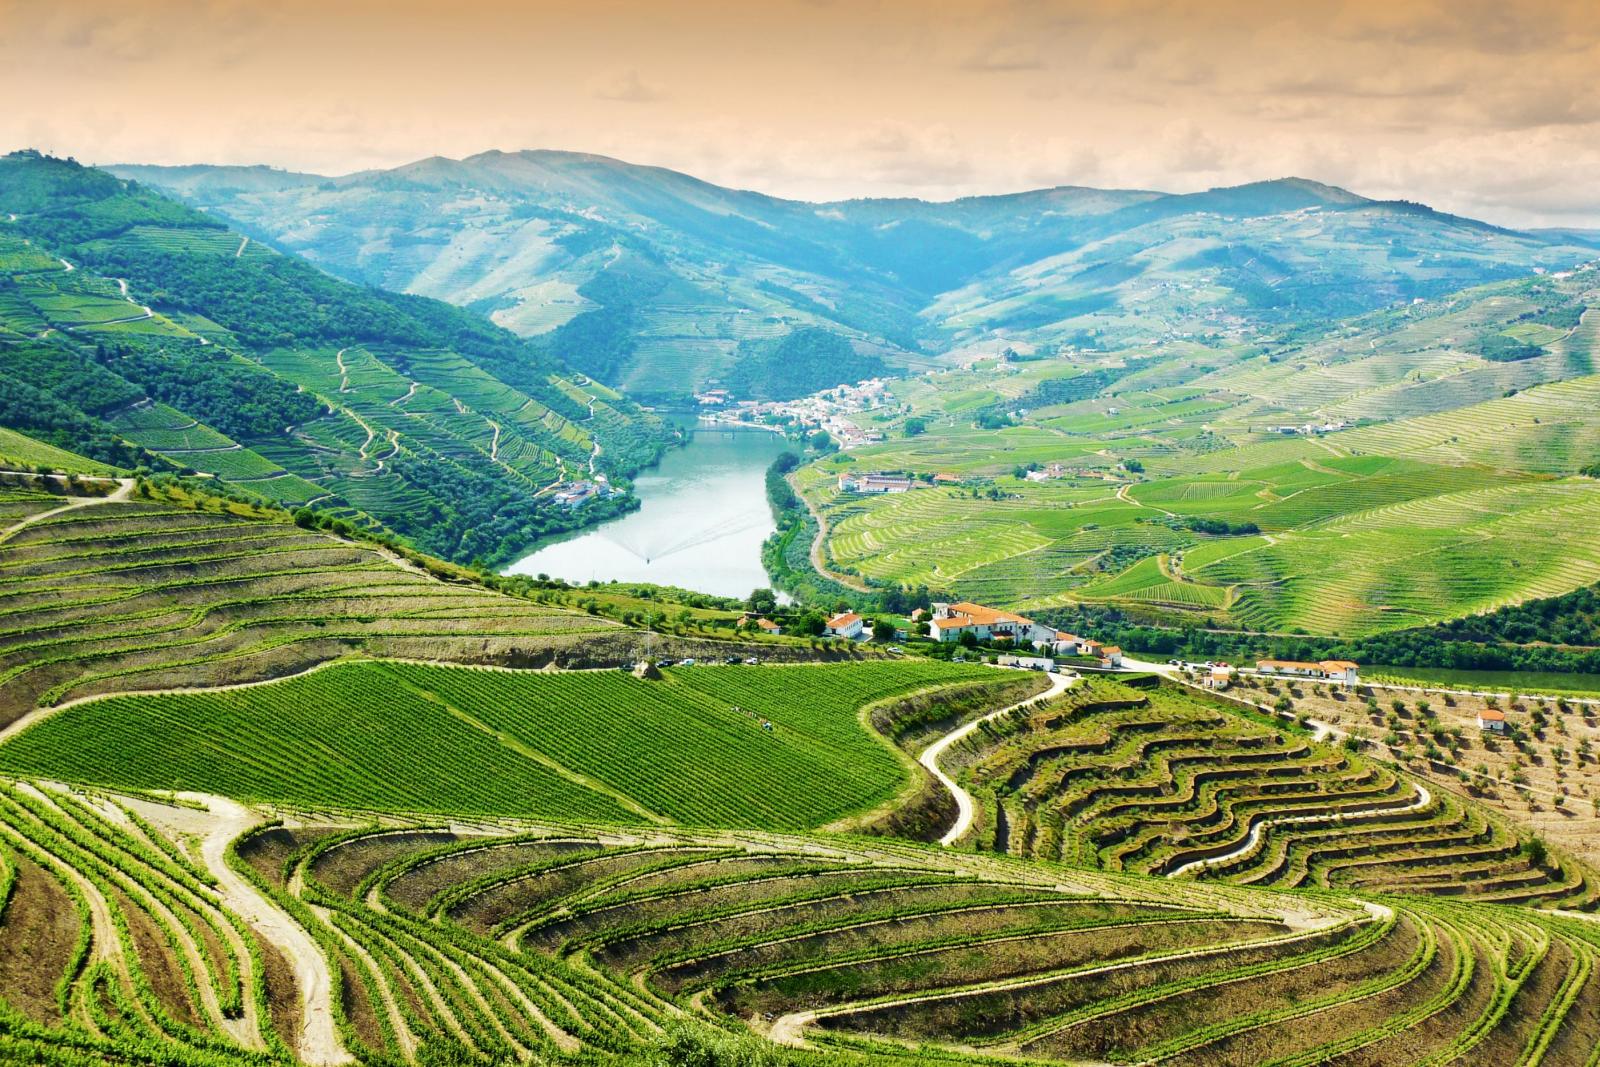 Vineyard in Douro Valley, Portugal